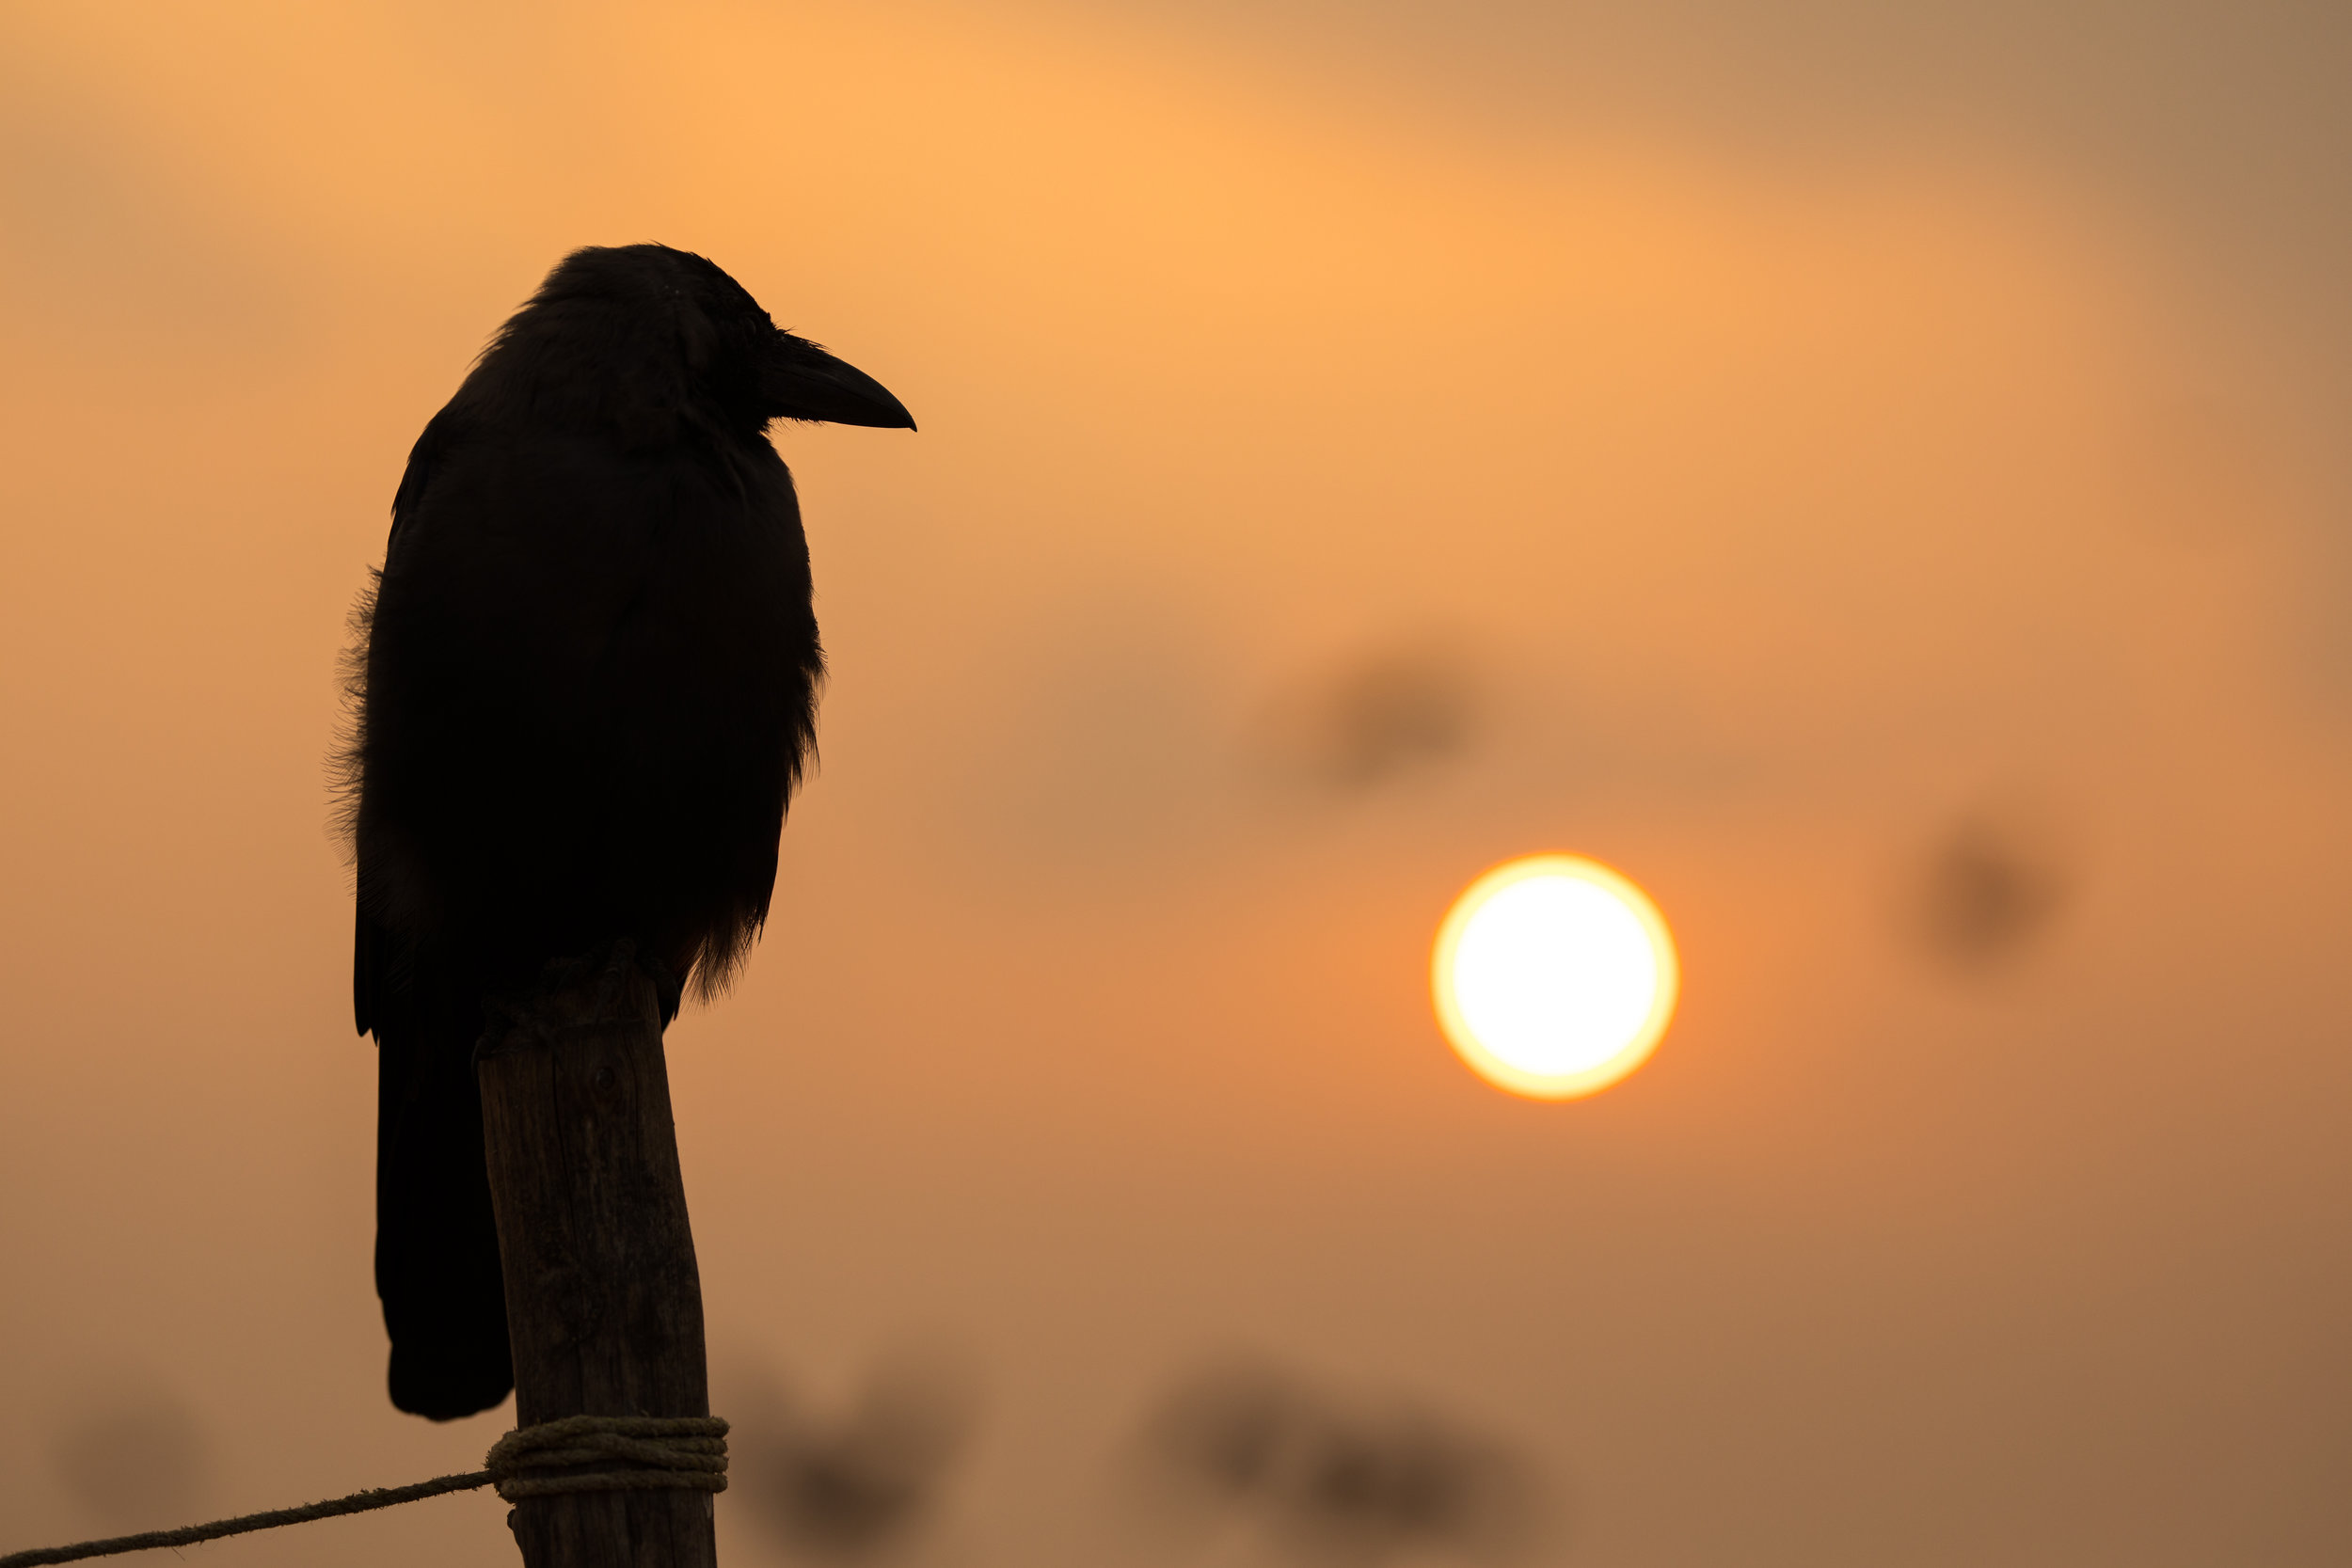 A silhouette of a bird against a golden sky at sunrise in India.